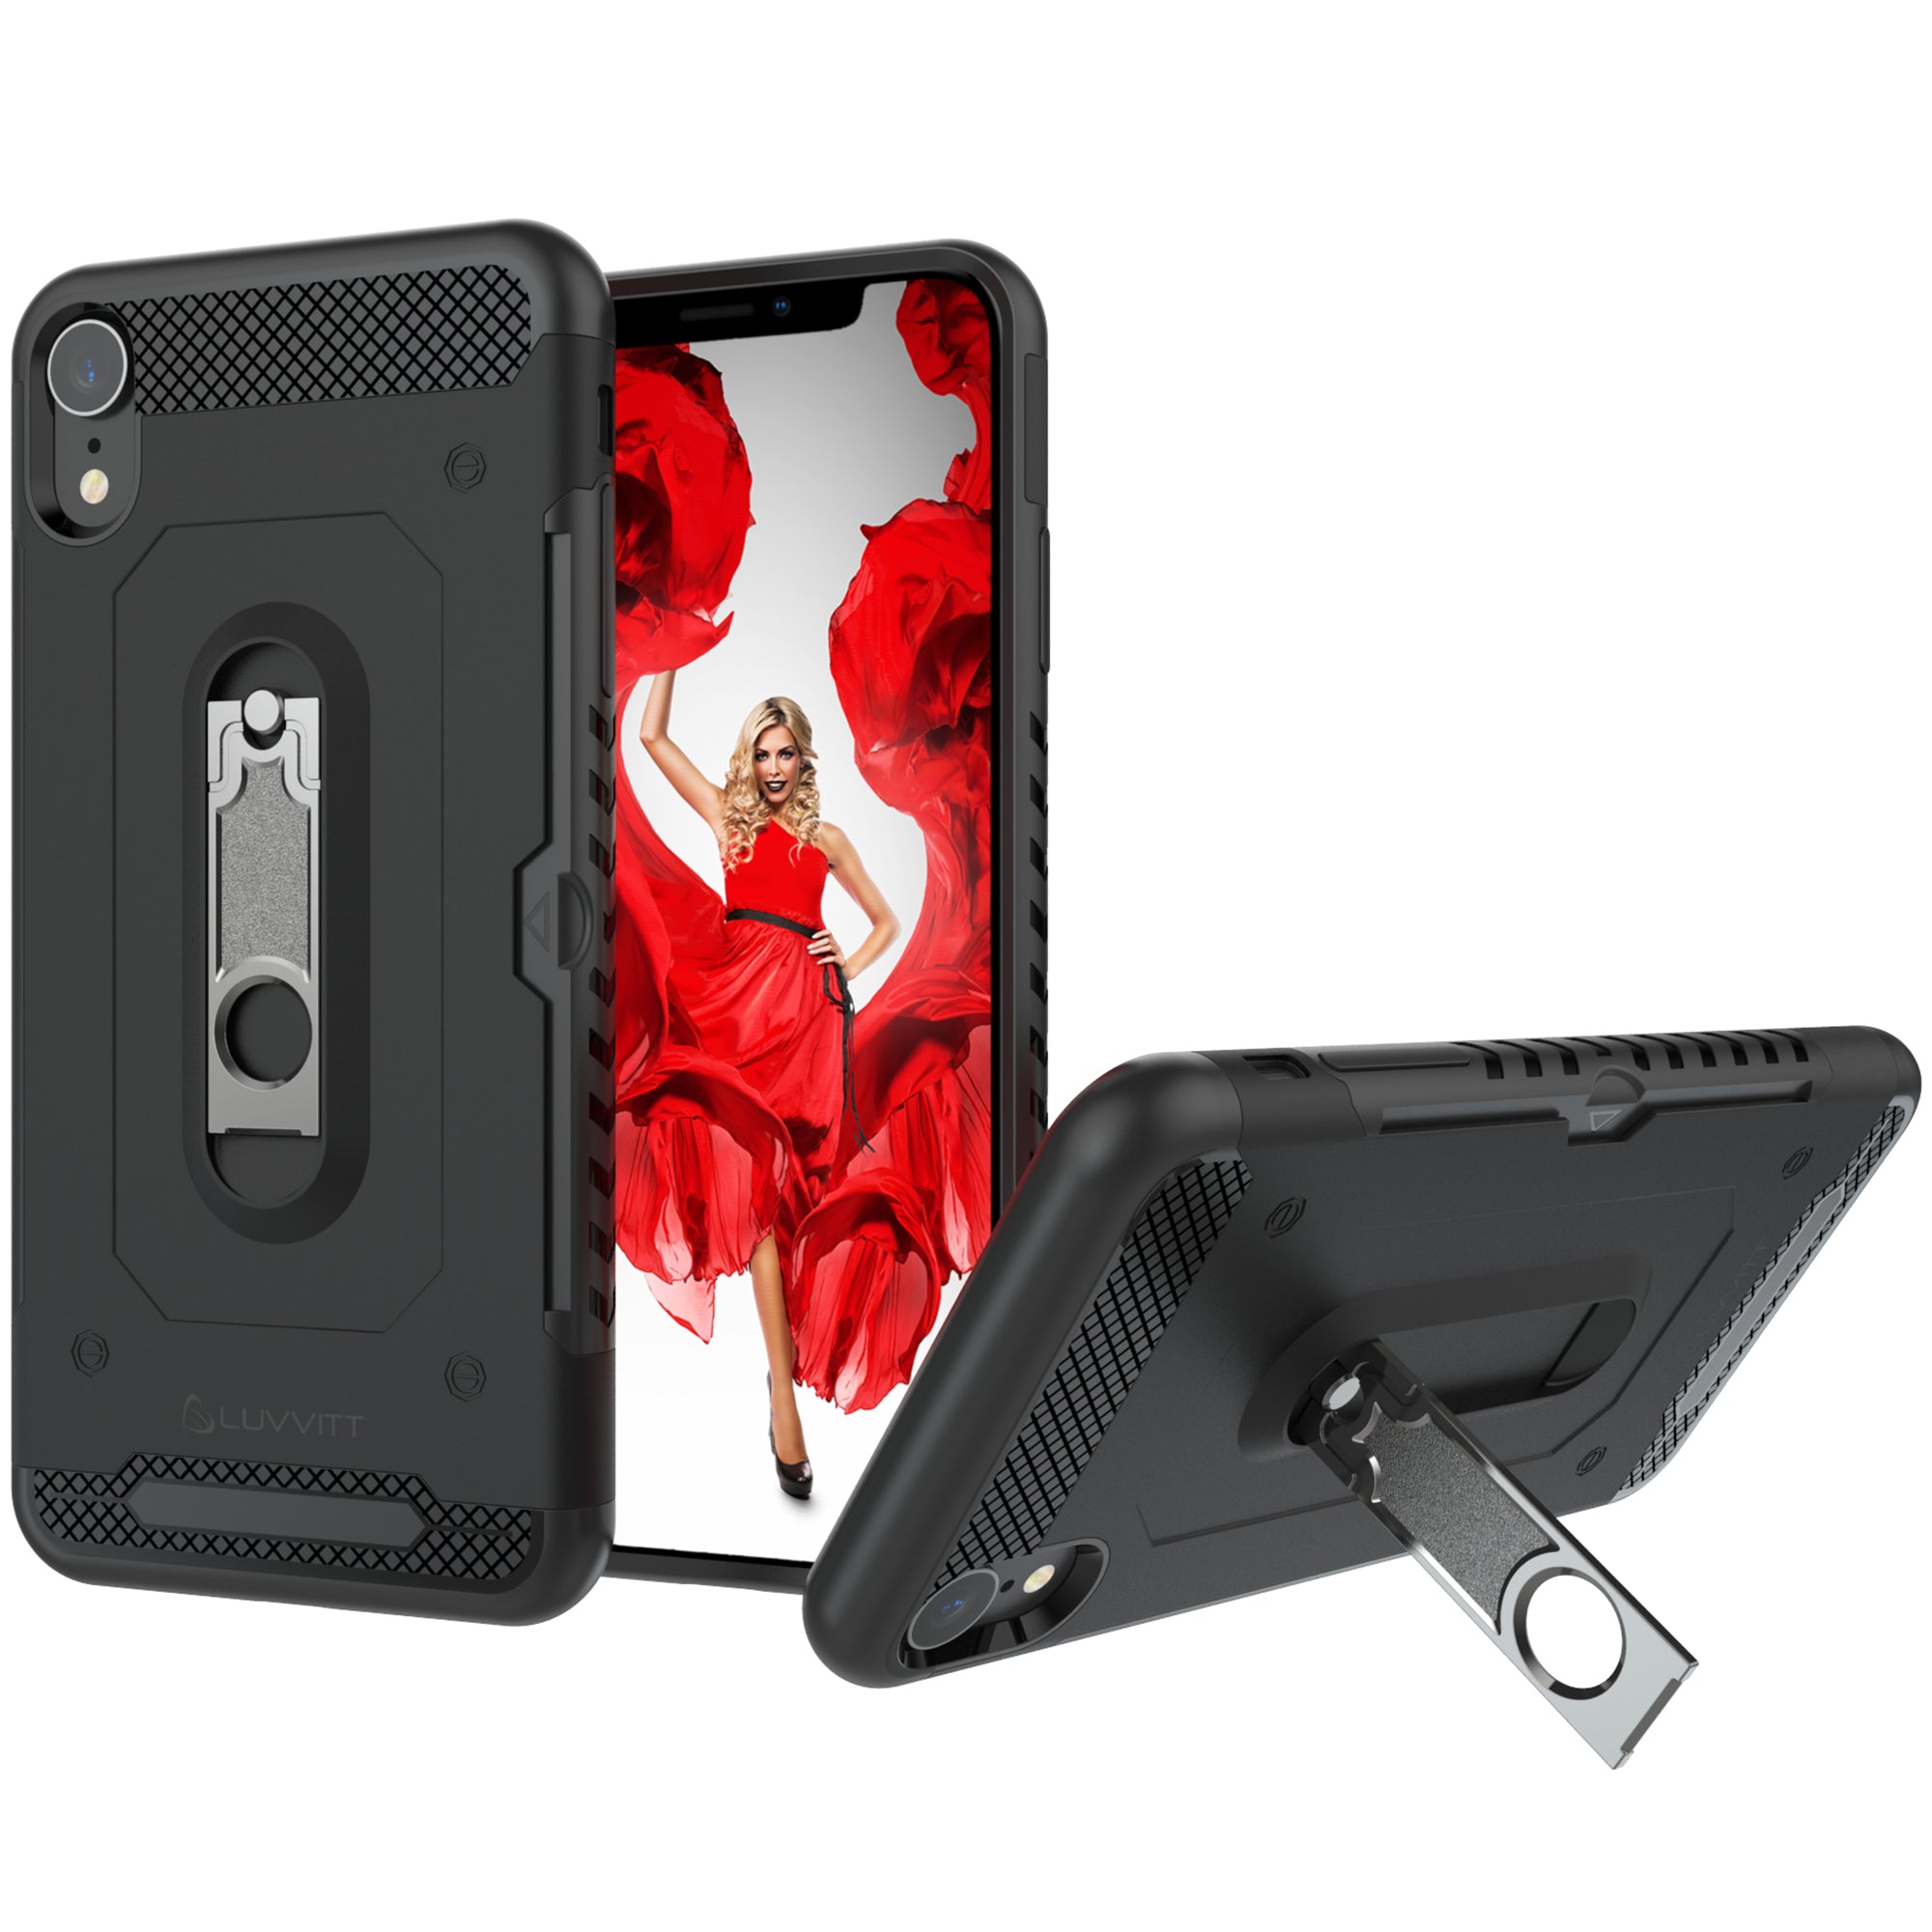 Luvvitt iPhone XR Case with Credit Card Holder and Kickstand for iPhone XR 2018 6.1